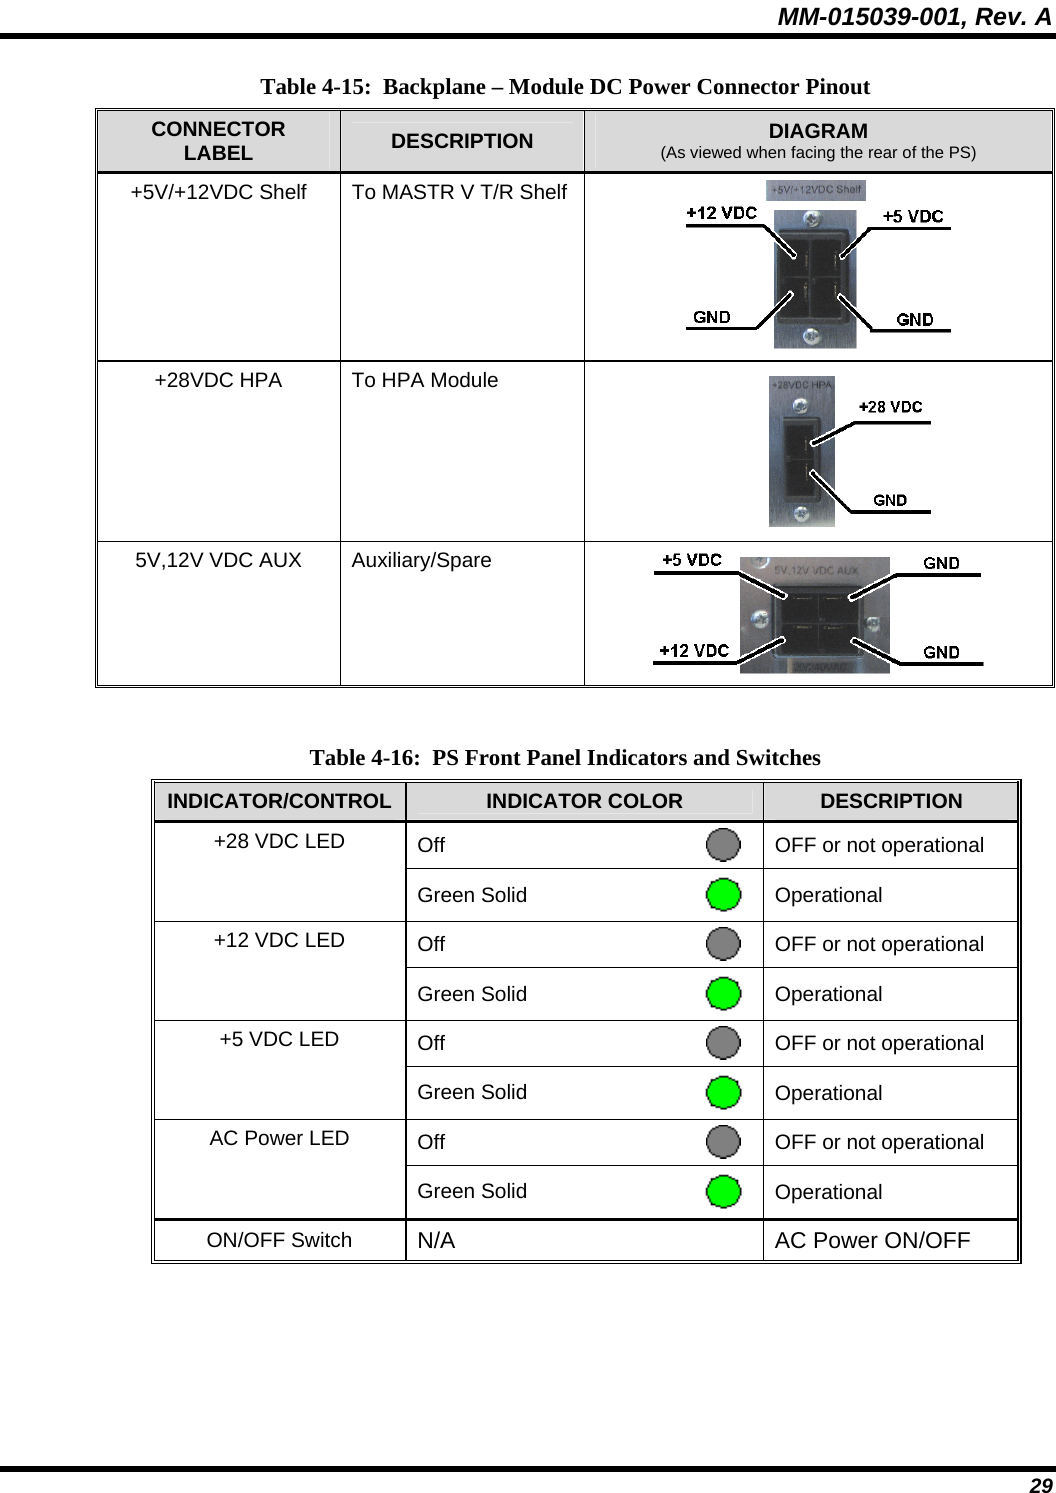 MM-015039-001, Rev. A 29 Table 4-15:  Backplane – Module DC Power Connector Pinout CONNECTOR LABEL  DESCRIPTION  DIAGRAM (As viewed when facing the rear of the PS) +5V/+12VDC Shelf  To MASTR V T/R Shelf  +28VDC HPA  To HPA Module                                5V,12V VDC AUX  Auxiliary/Spare    Table 4-16:  PS Front Panel Indicators and Switches INDICATOR/CONTROL  INDICATOR COLOR  DESCRIPTION Off   OFF or not operational +28 VDC LED Green Solid   Operational Off   OFF or not operational +12 VDC LED Green Solid   Operational Off   OFF or not operational +5 VDC LED Green Solid   Operational Off   OFF or not operational AC Power LED Green Solid   Operational ON/OFF Switch  N/A  AC Power ON/OFF  